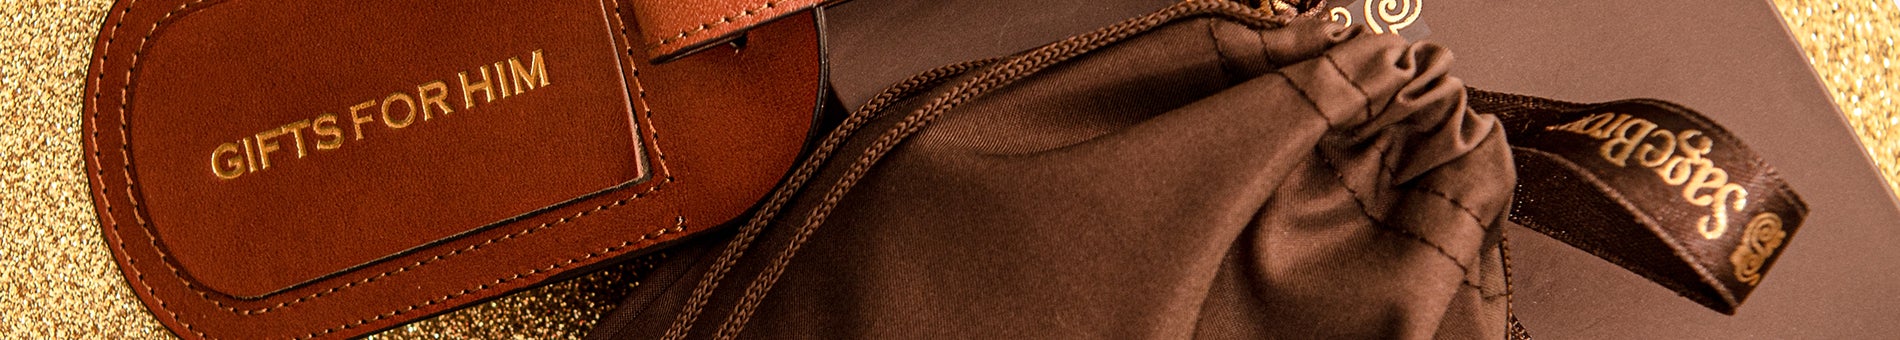 Leather Gifts For Him | Find the perfect luxury leather gift for the special man in your life.